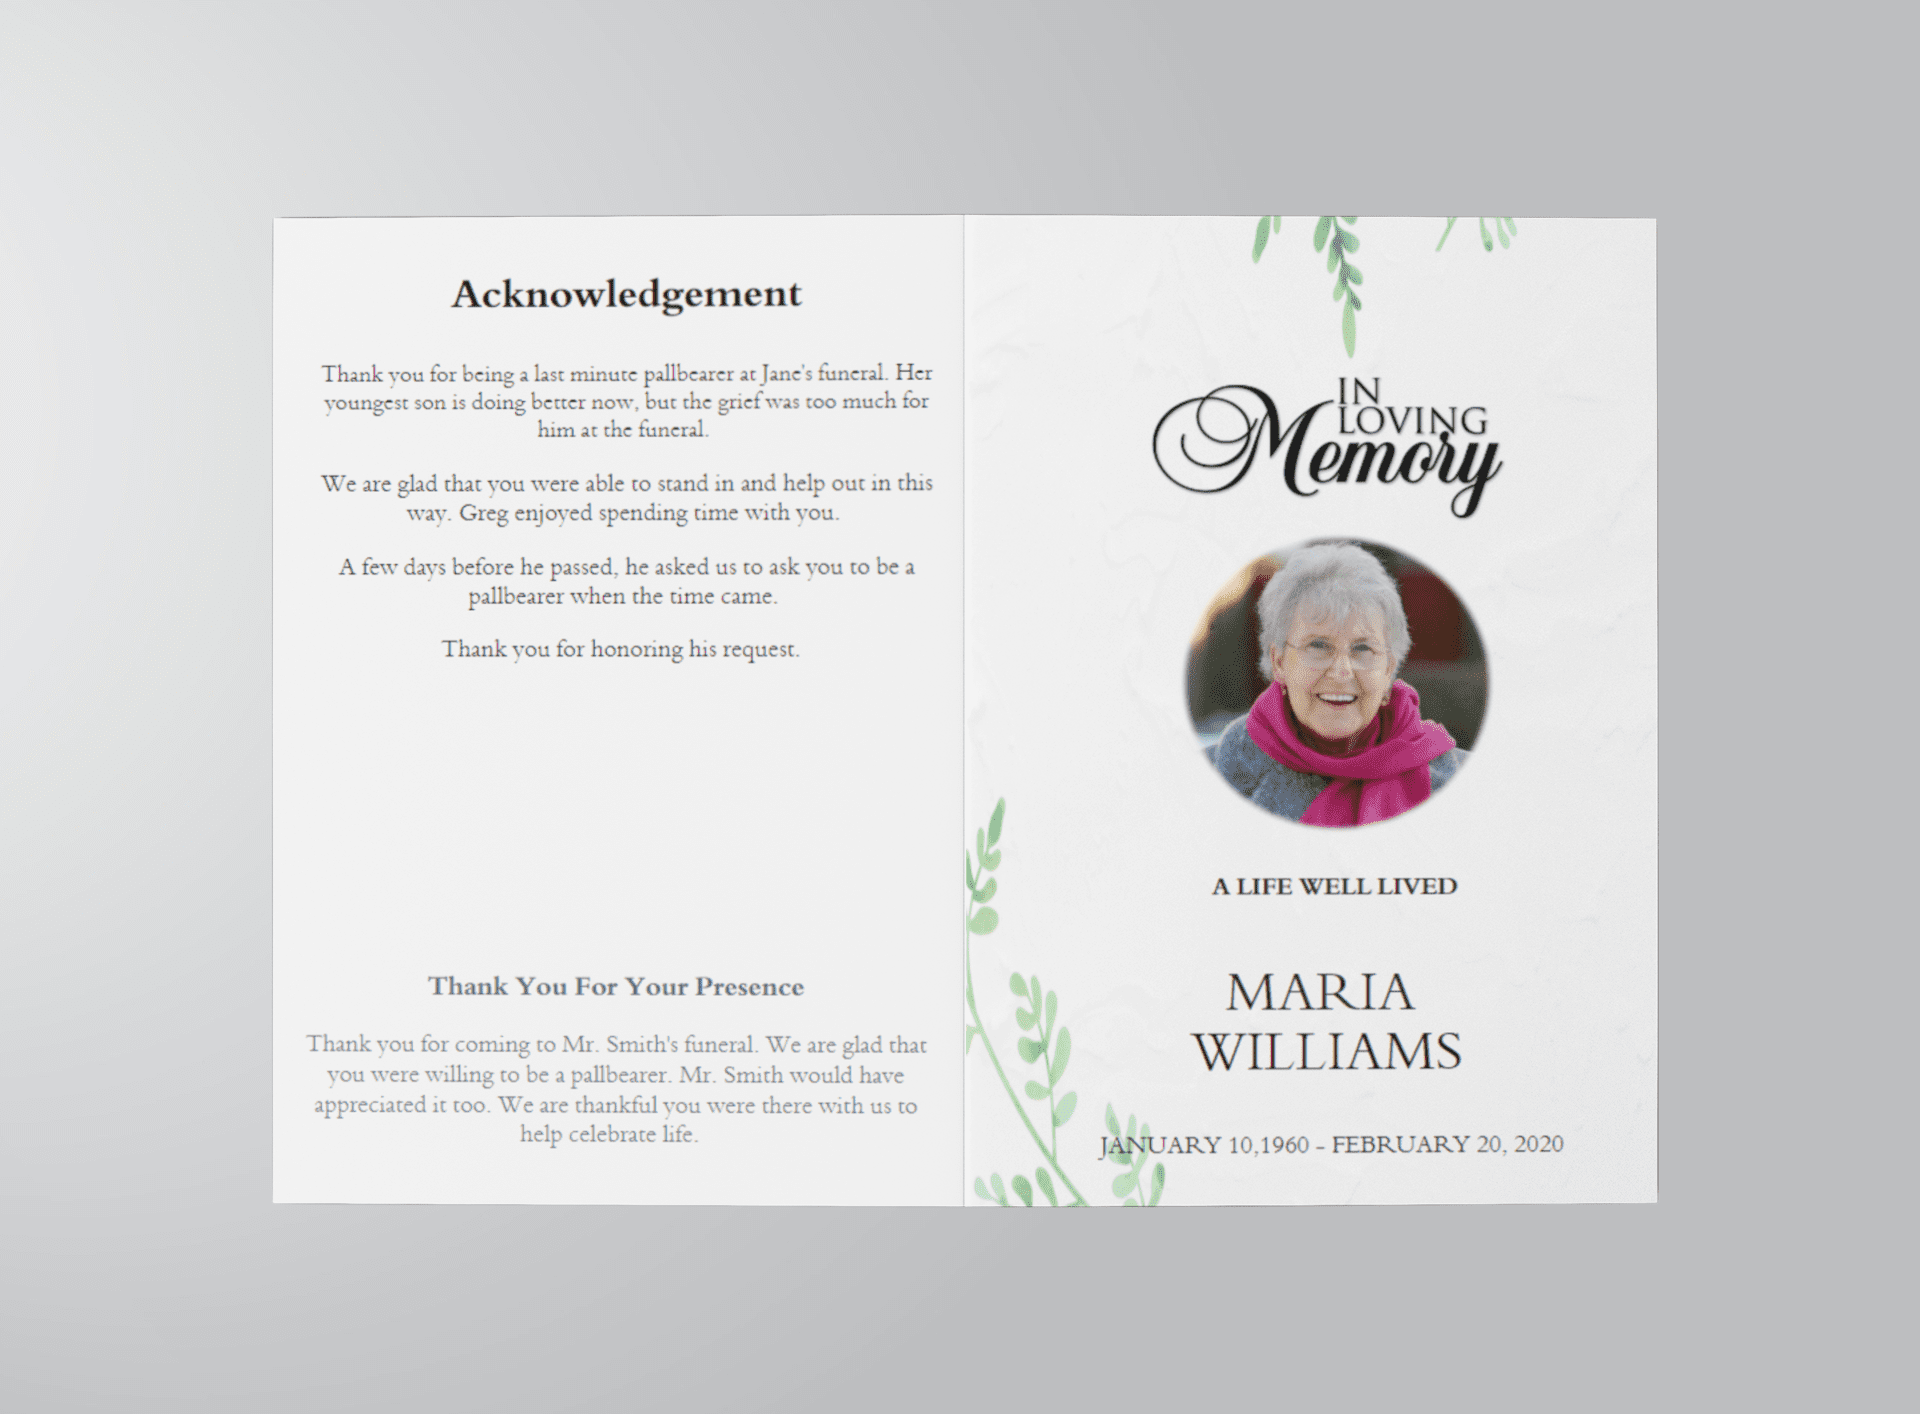 Green Natural Funeral Program Template outside view